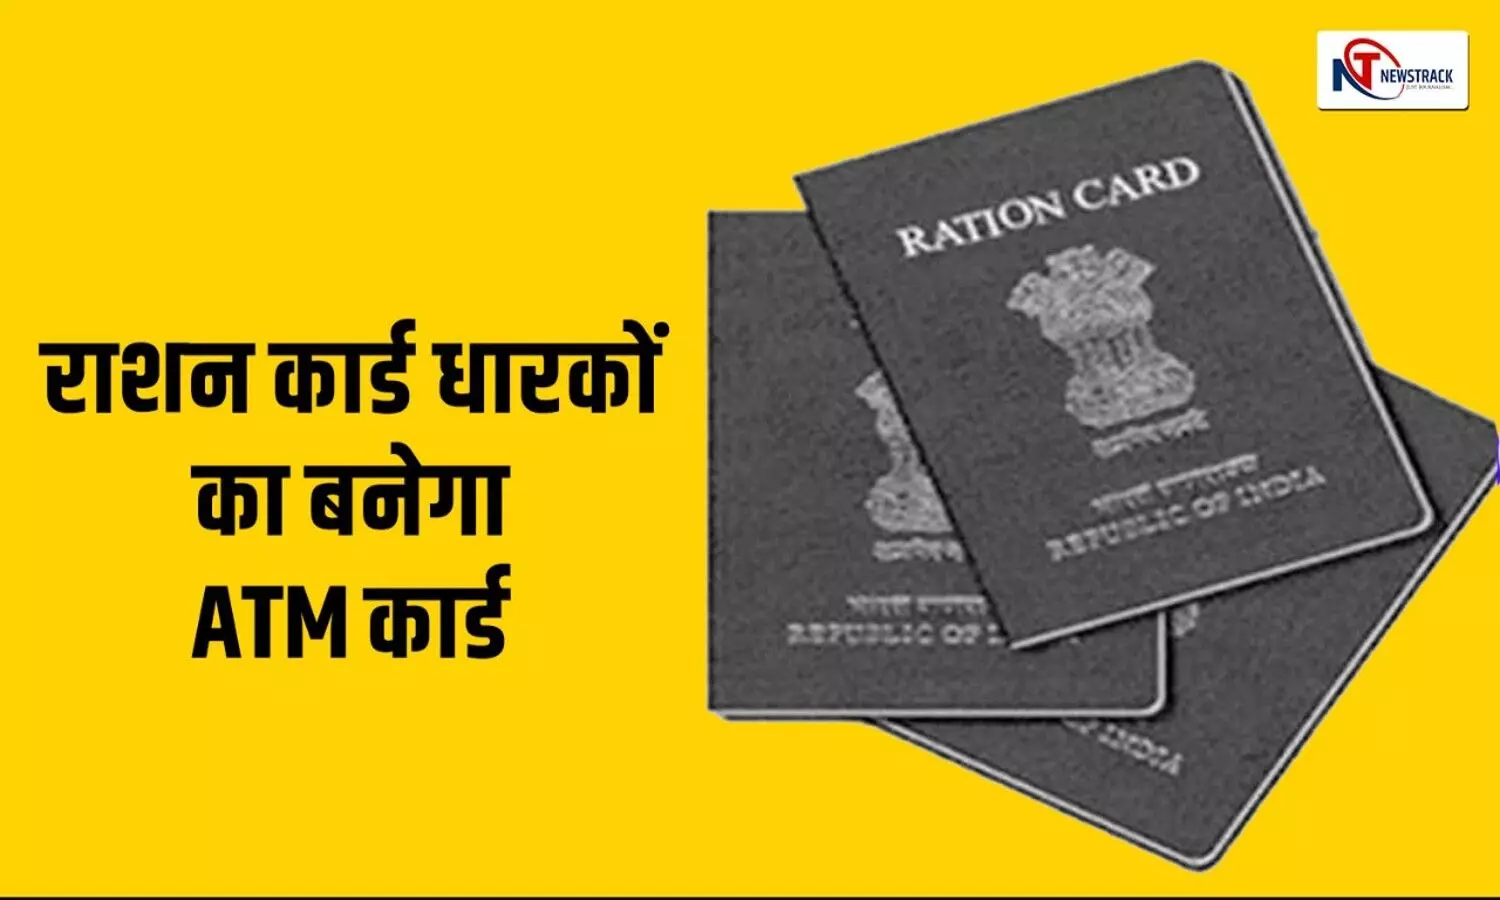 ATM card of ration card holders